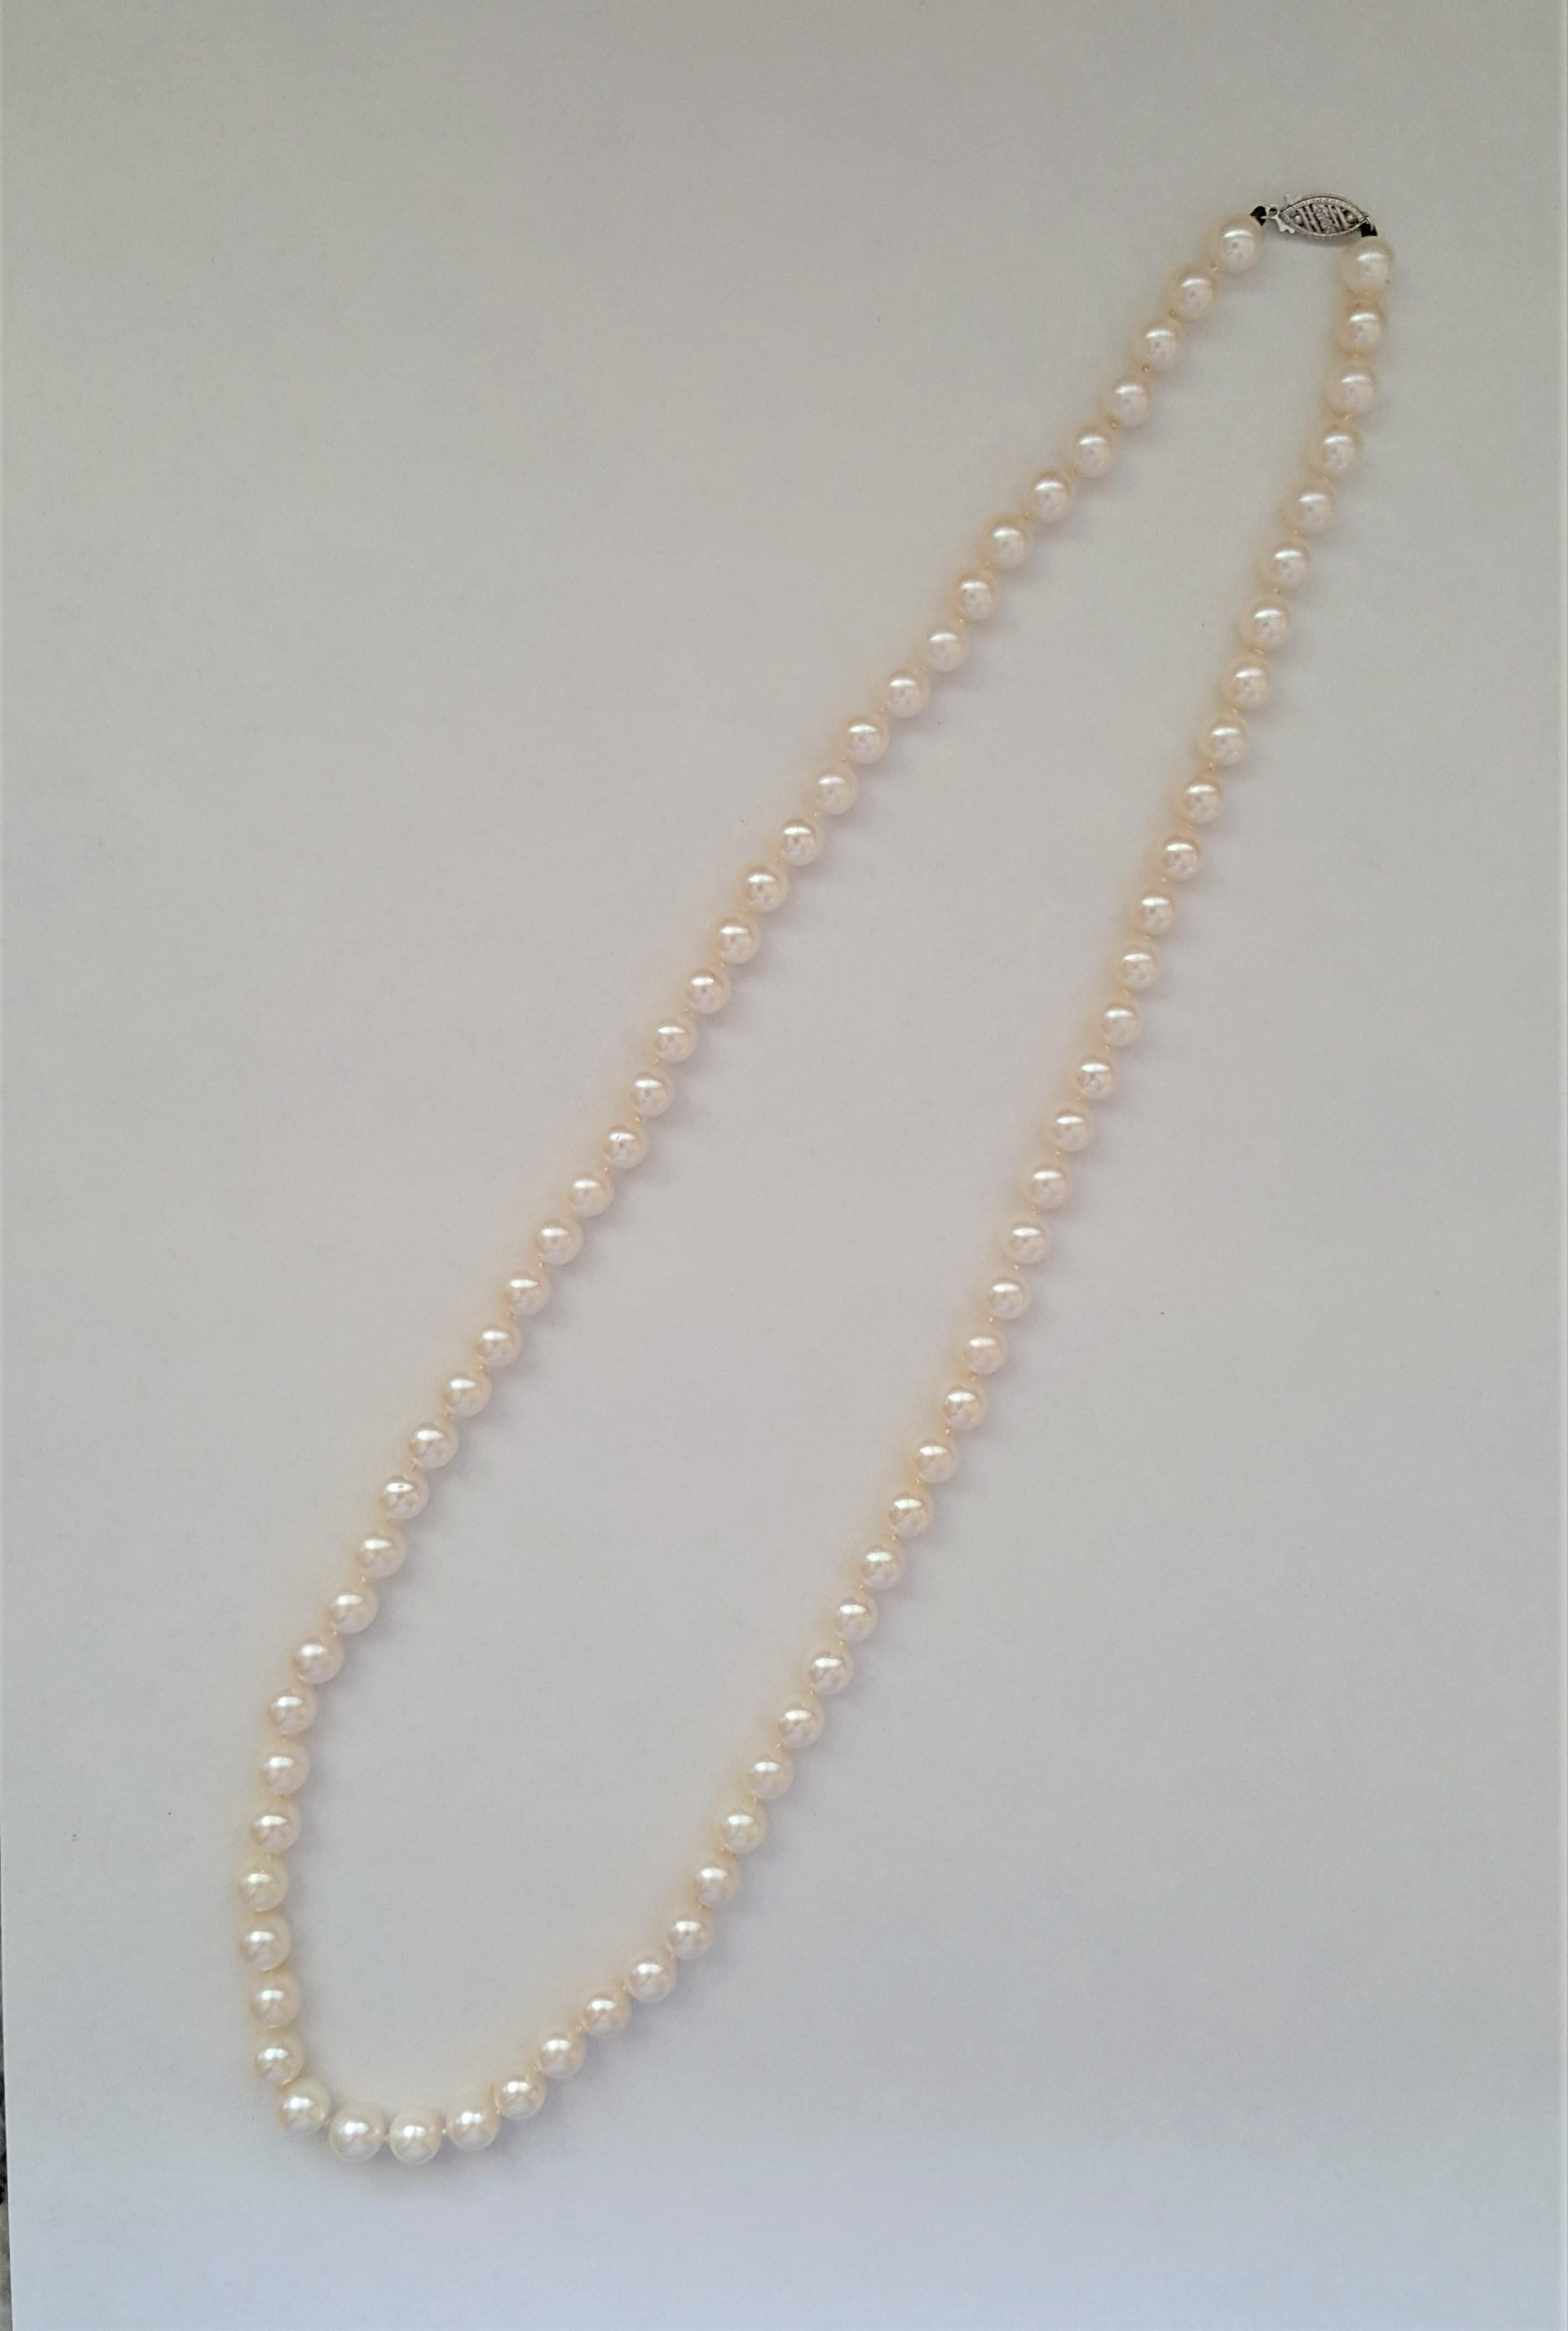 A beautiful strand of grade AA cultured white pearls that are 7mm in diameter and the necklace is 23 inches in length. The pearls are in very good condition; the nacre is lustrous and clean. The pearls are secured with a 14kt white gold